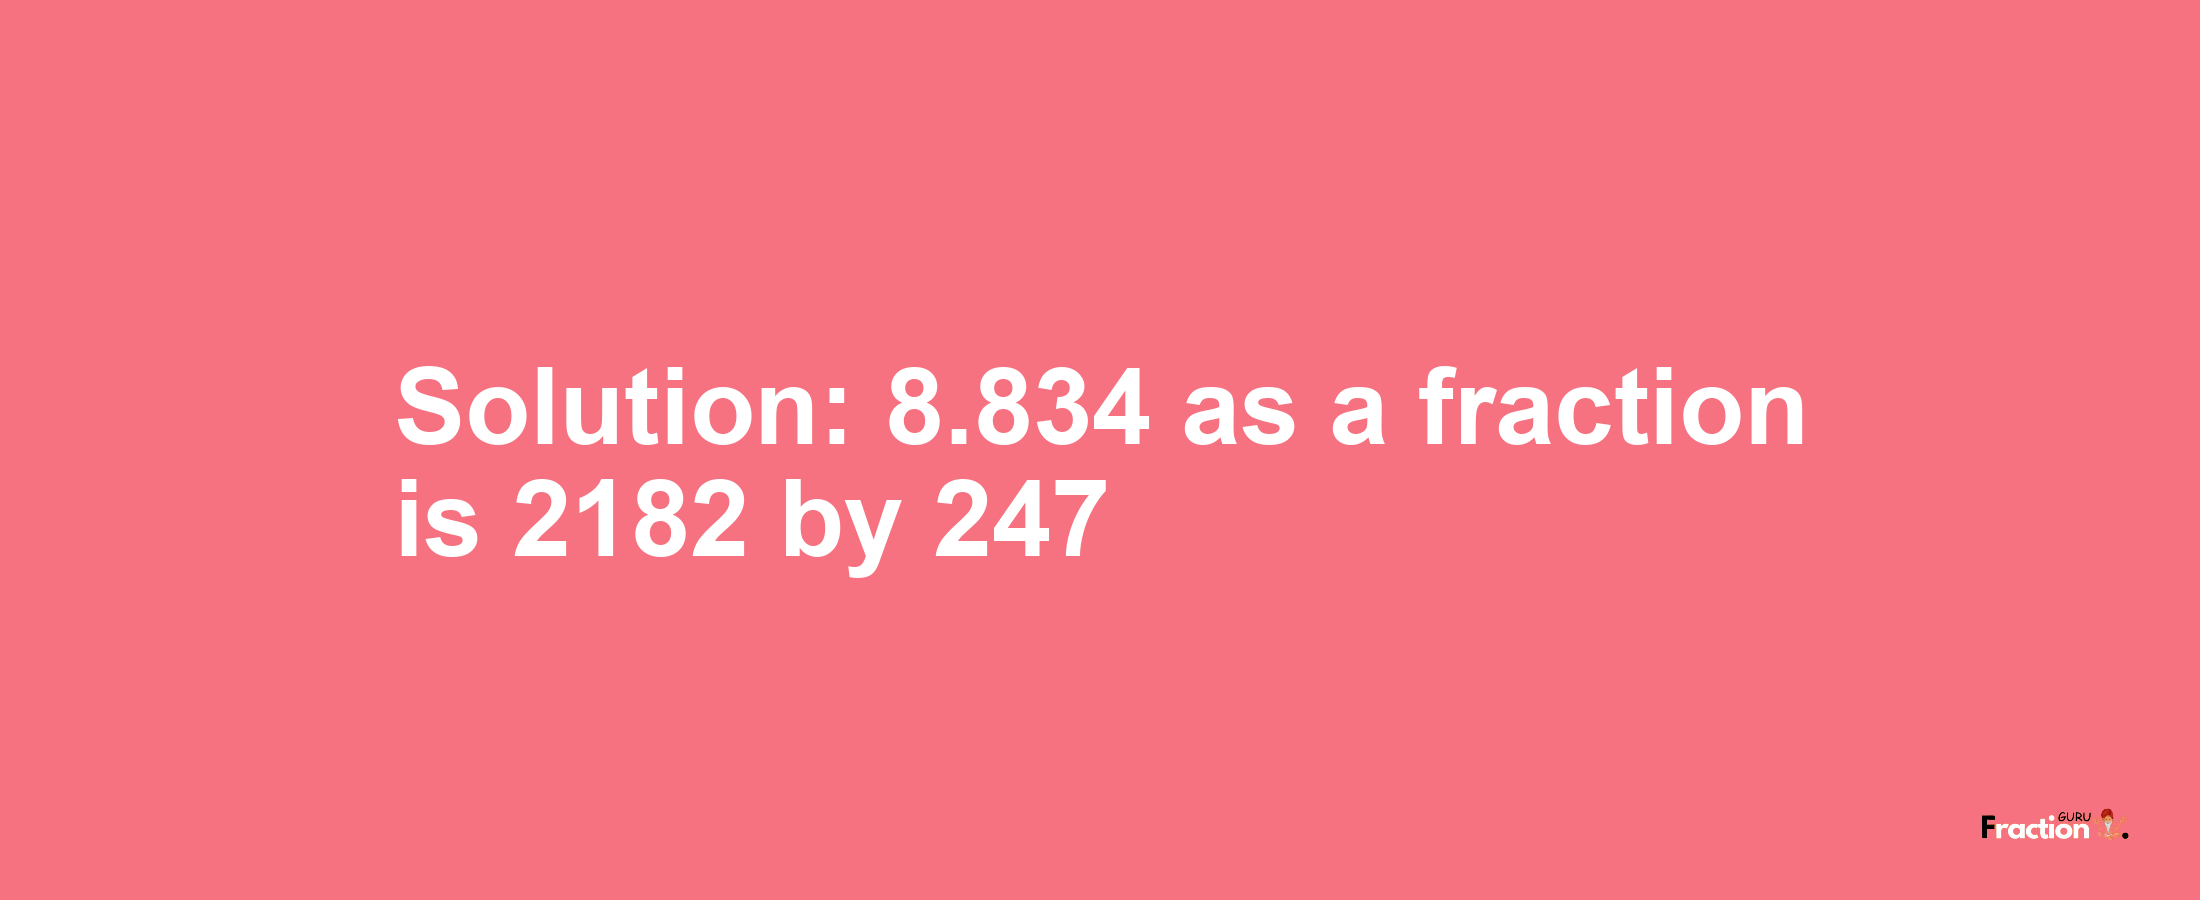 Solution:8.834 as a fraction is 2182/247